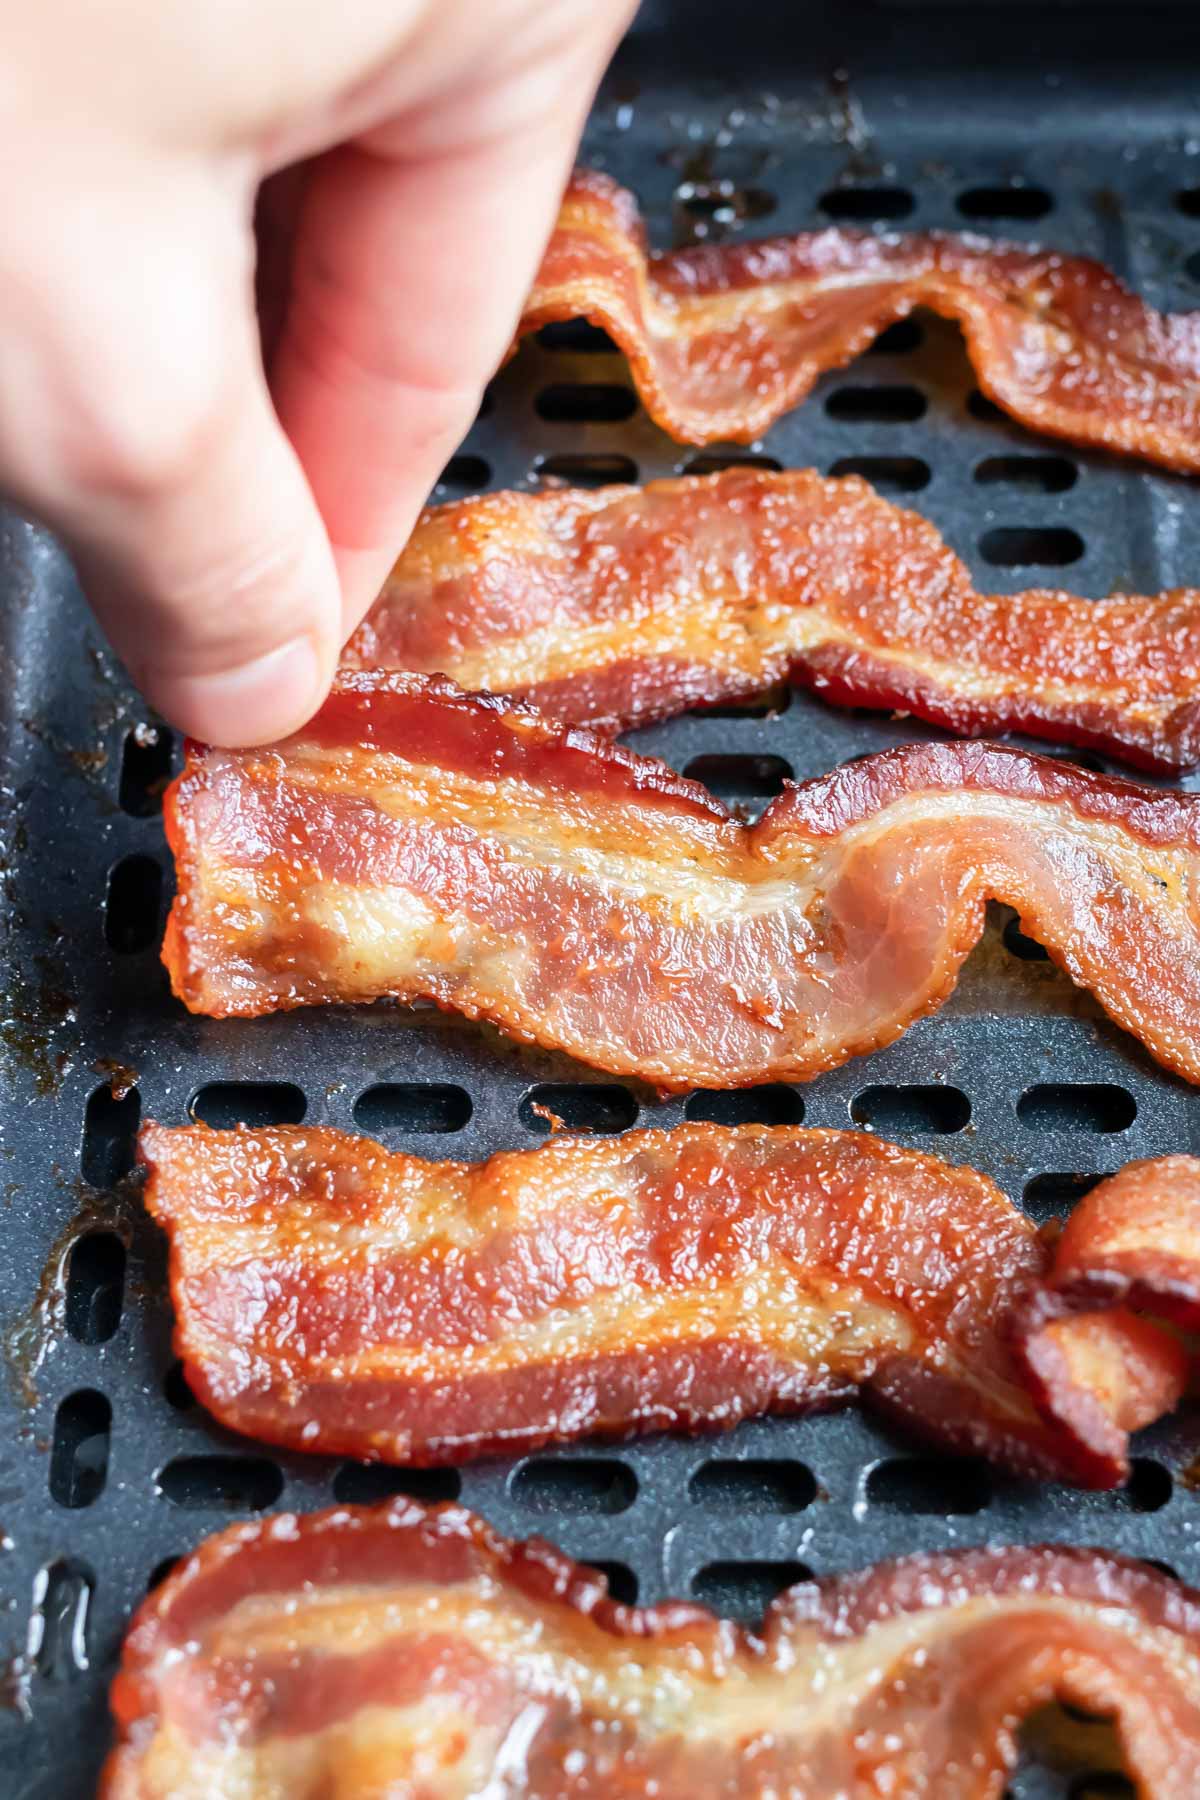 How Do I Cook Bacon In An Air Fryer